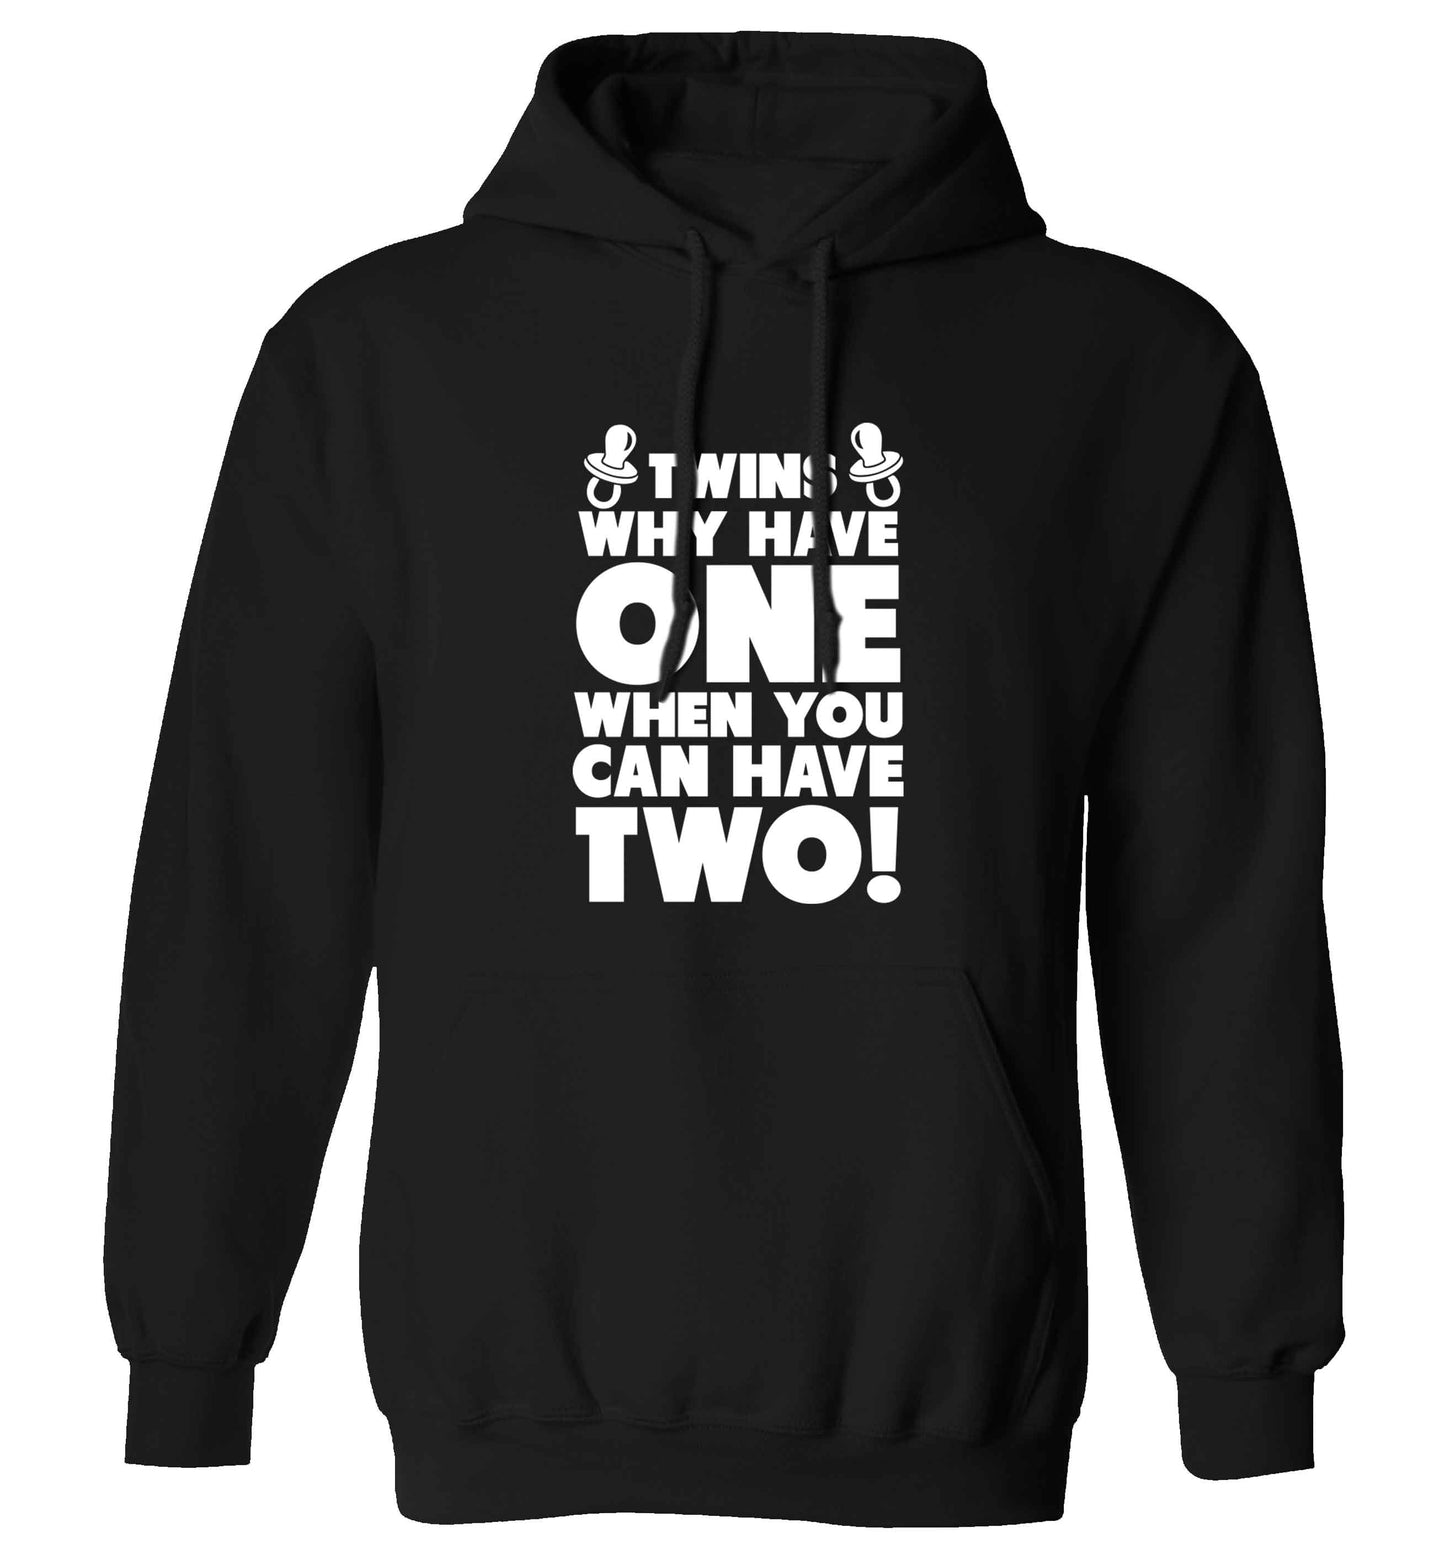 Twins why have one when you can have two adults unisex black hoodie 2XL